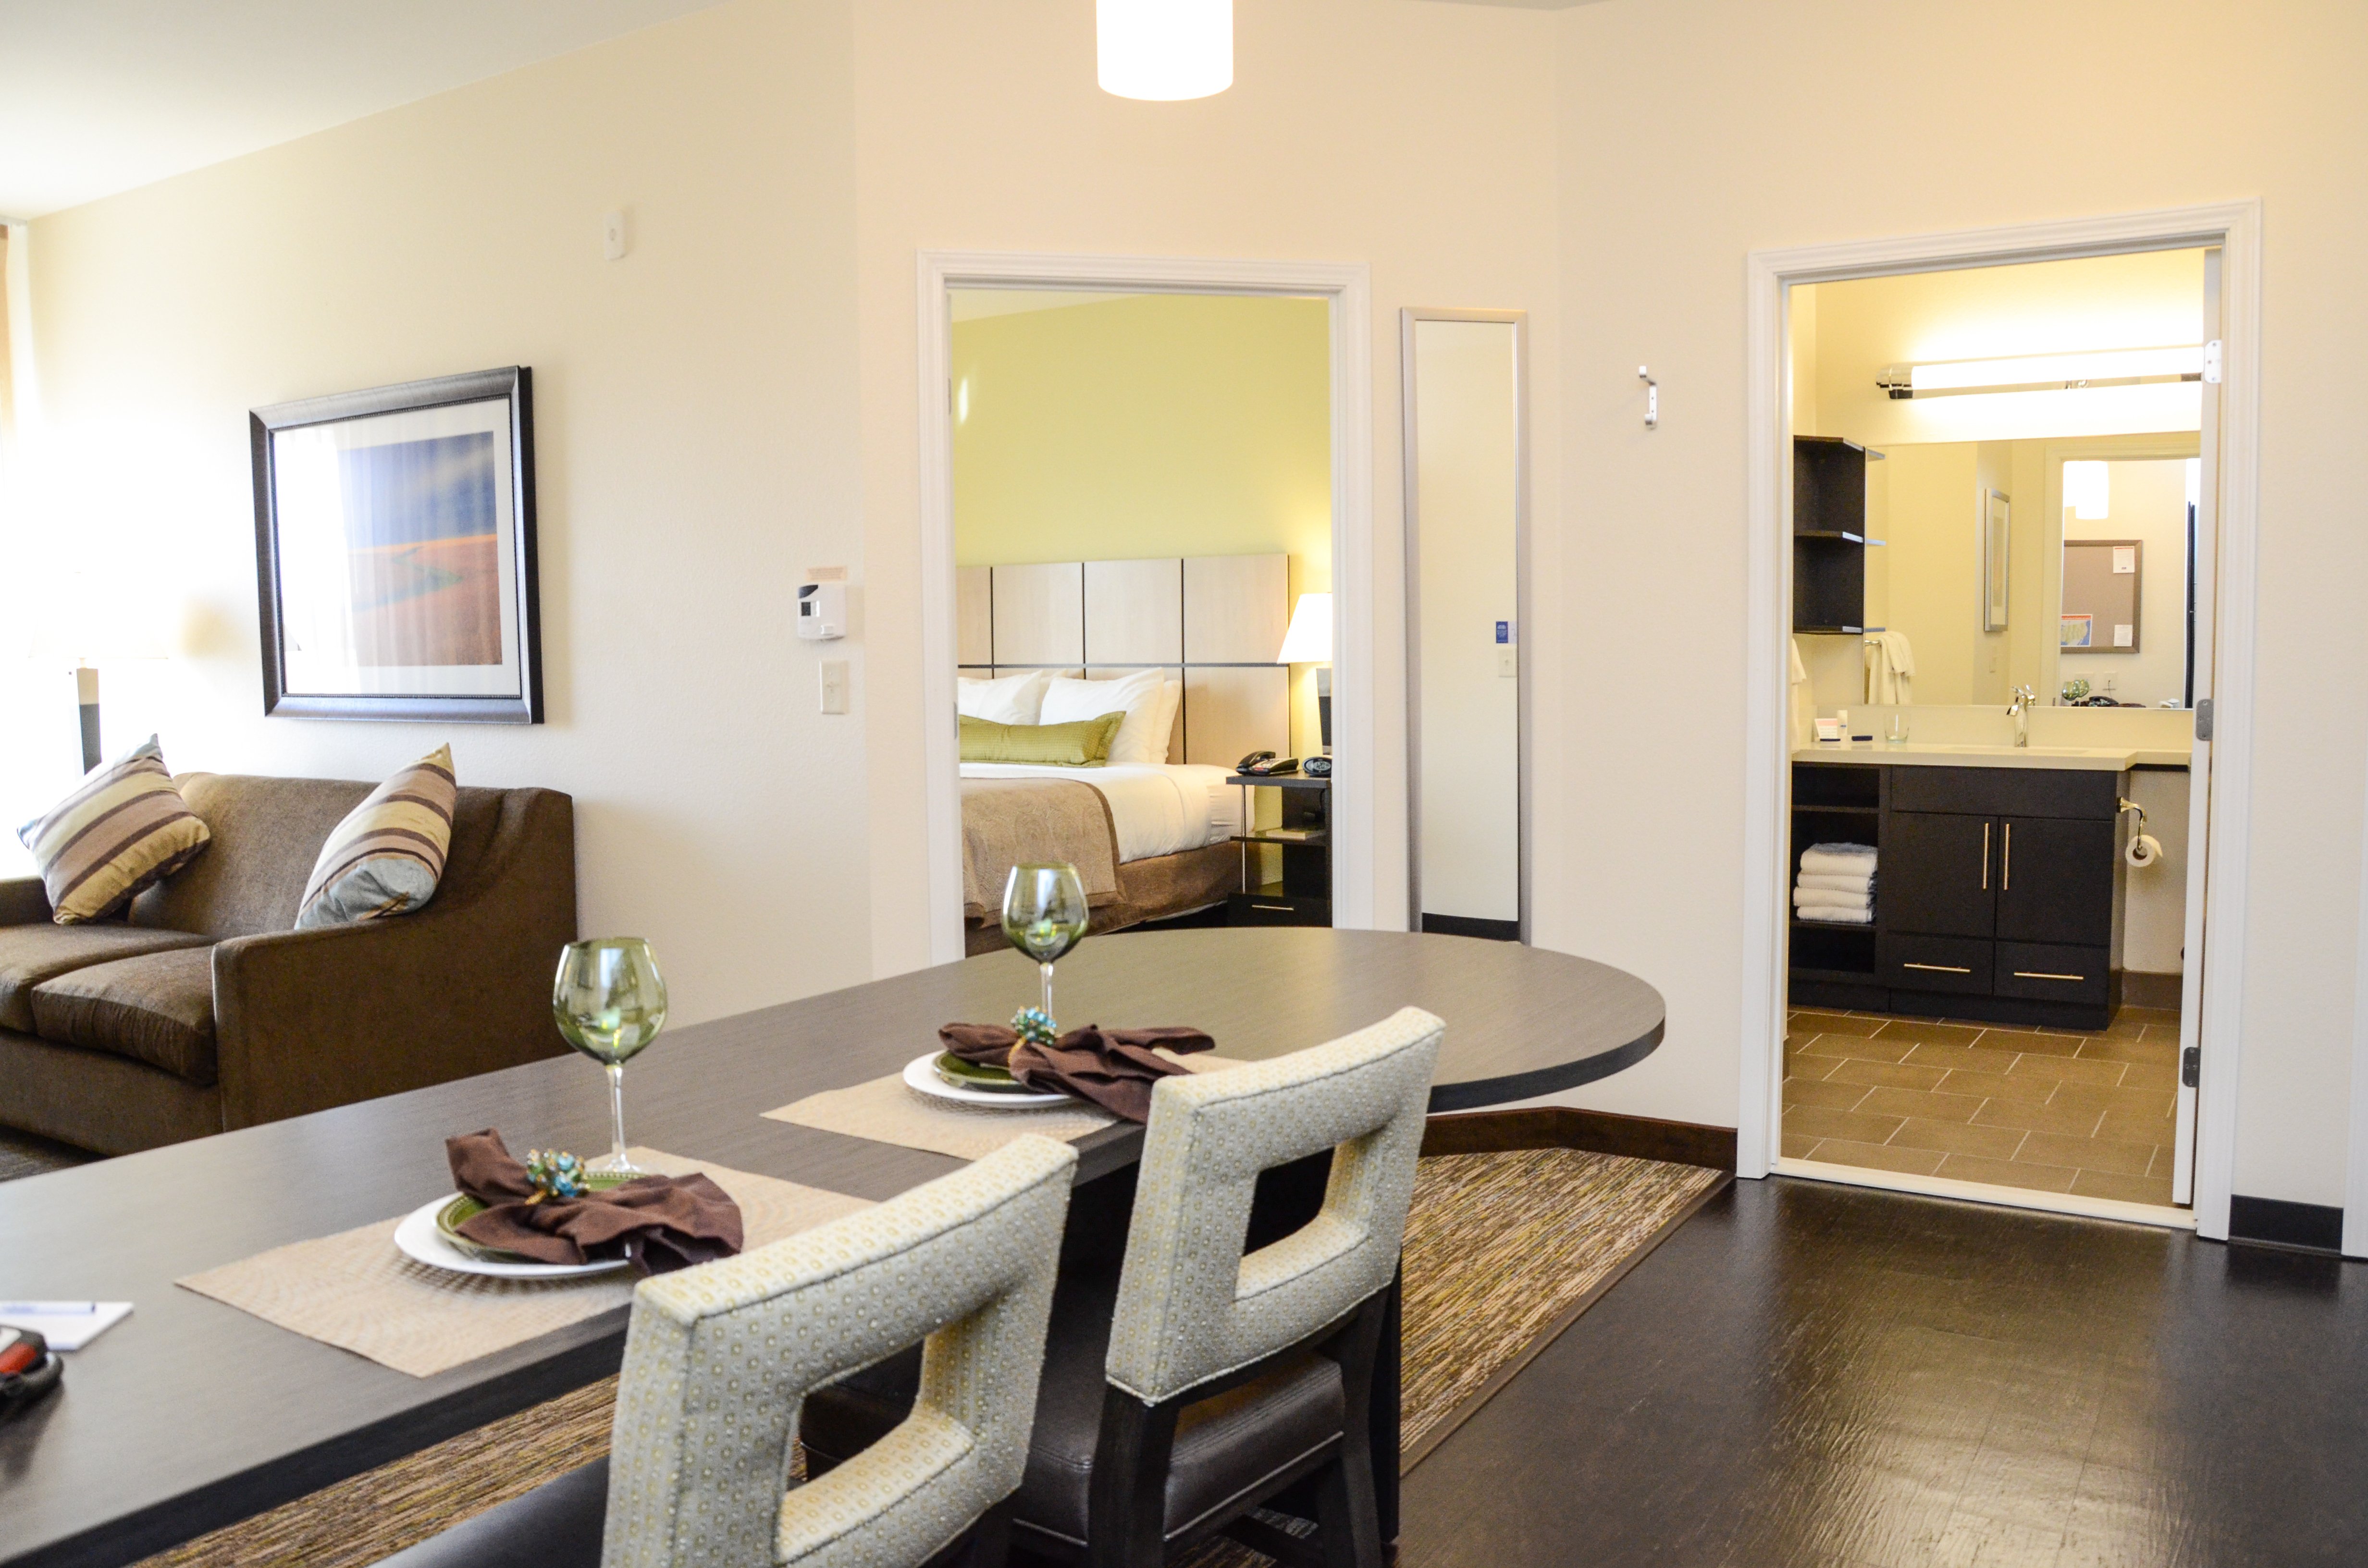 Spacious rooms at the Candlewood Suites in Greeley